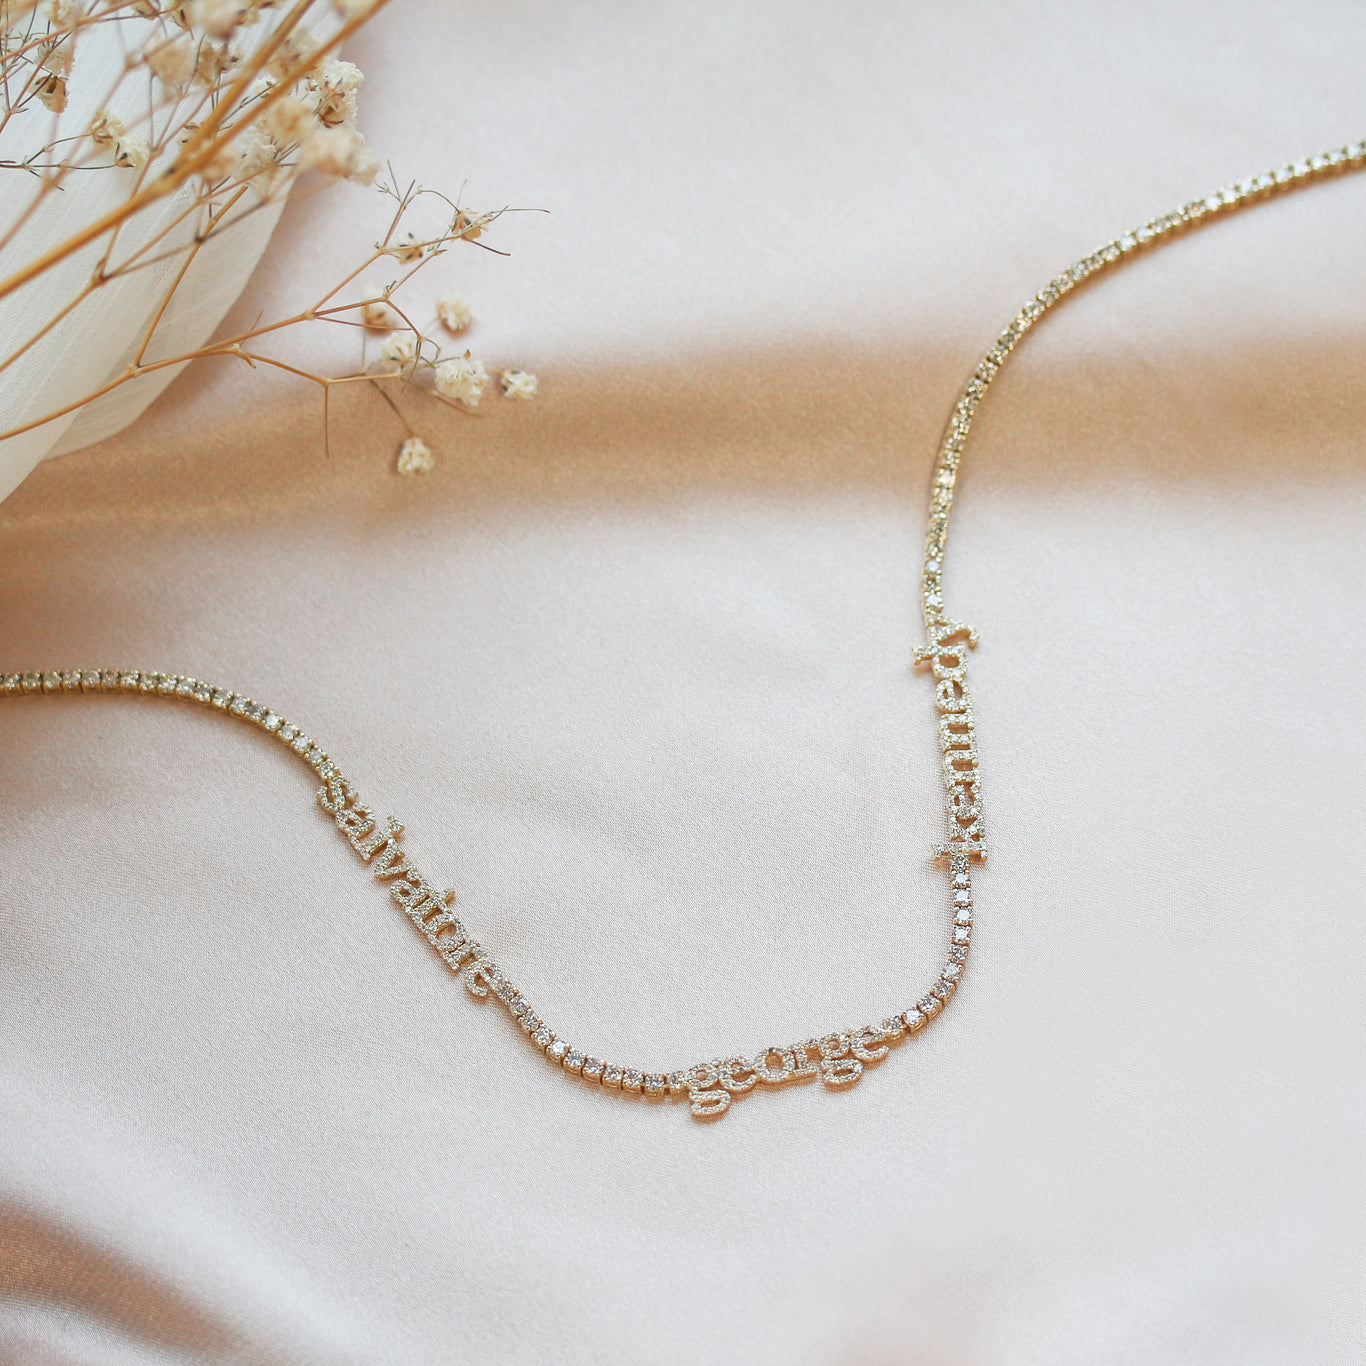 Custom Name Tennis Necklace shown in Yellow Gold